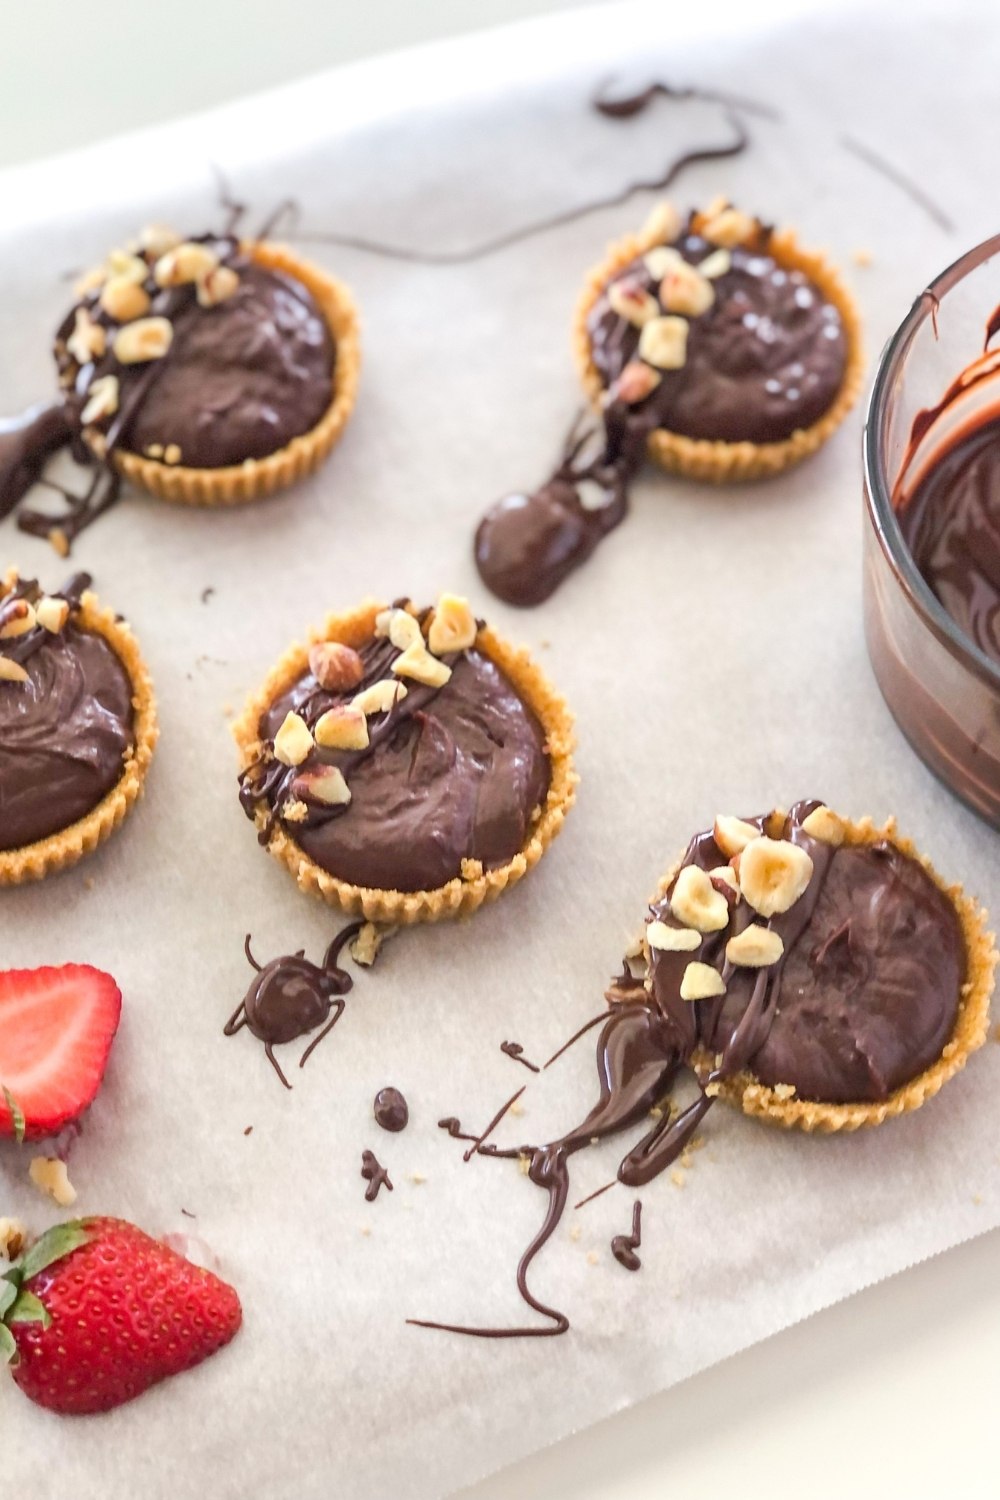 mini tarts with chocolate drizzle, chopped hazelnuts, and sliced strawberries